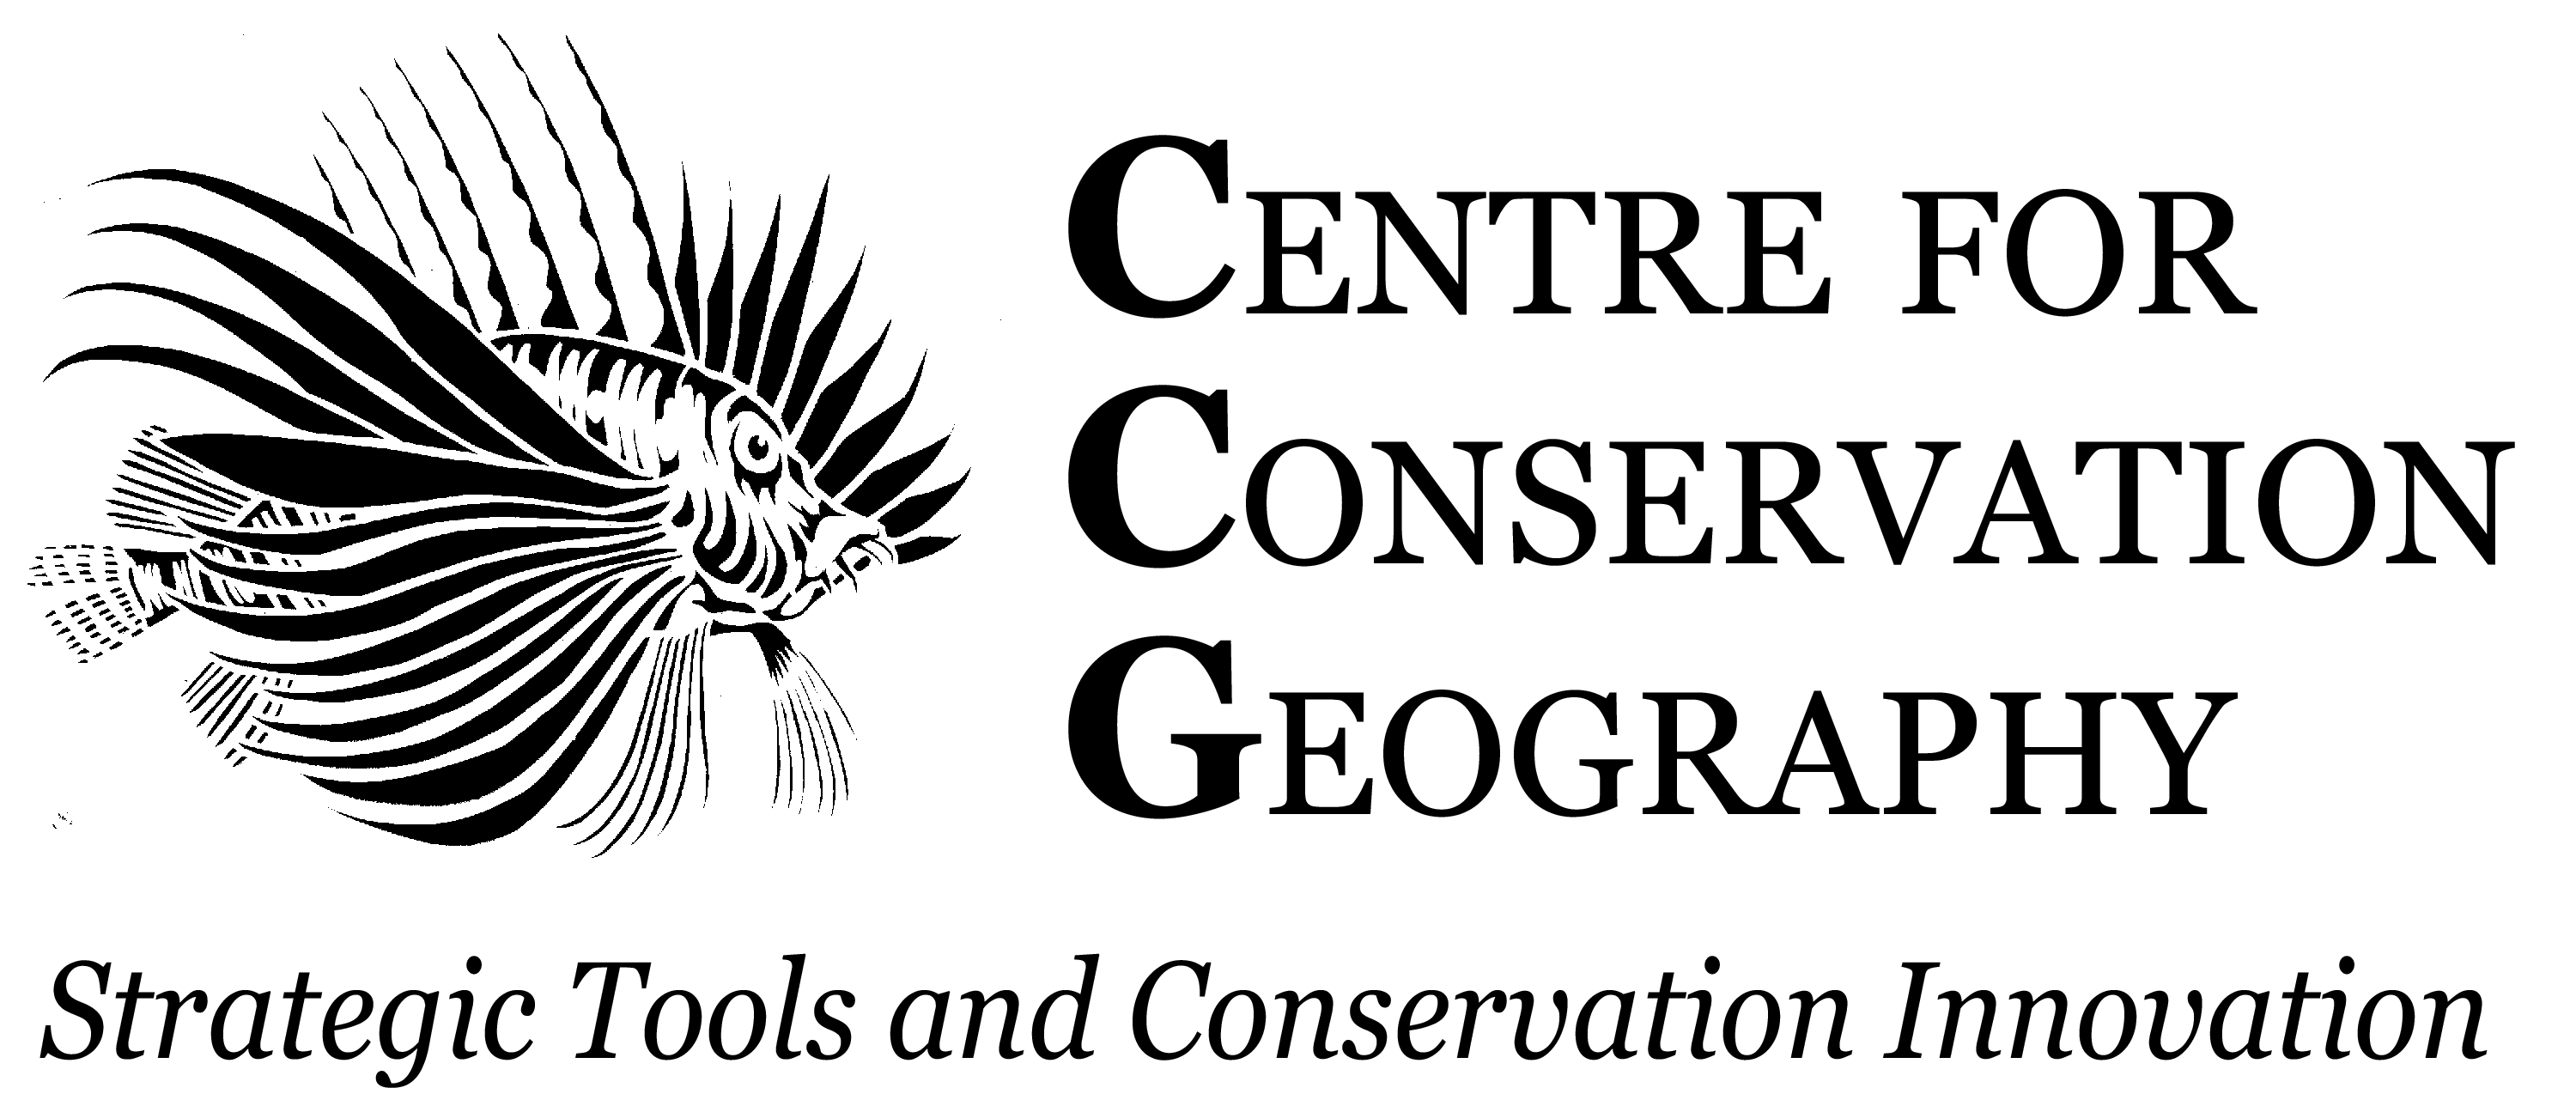 NRMjobs - 20017828 - Conservation Spatial Scientist / GIS Analyst